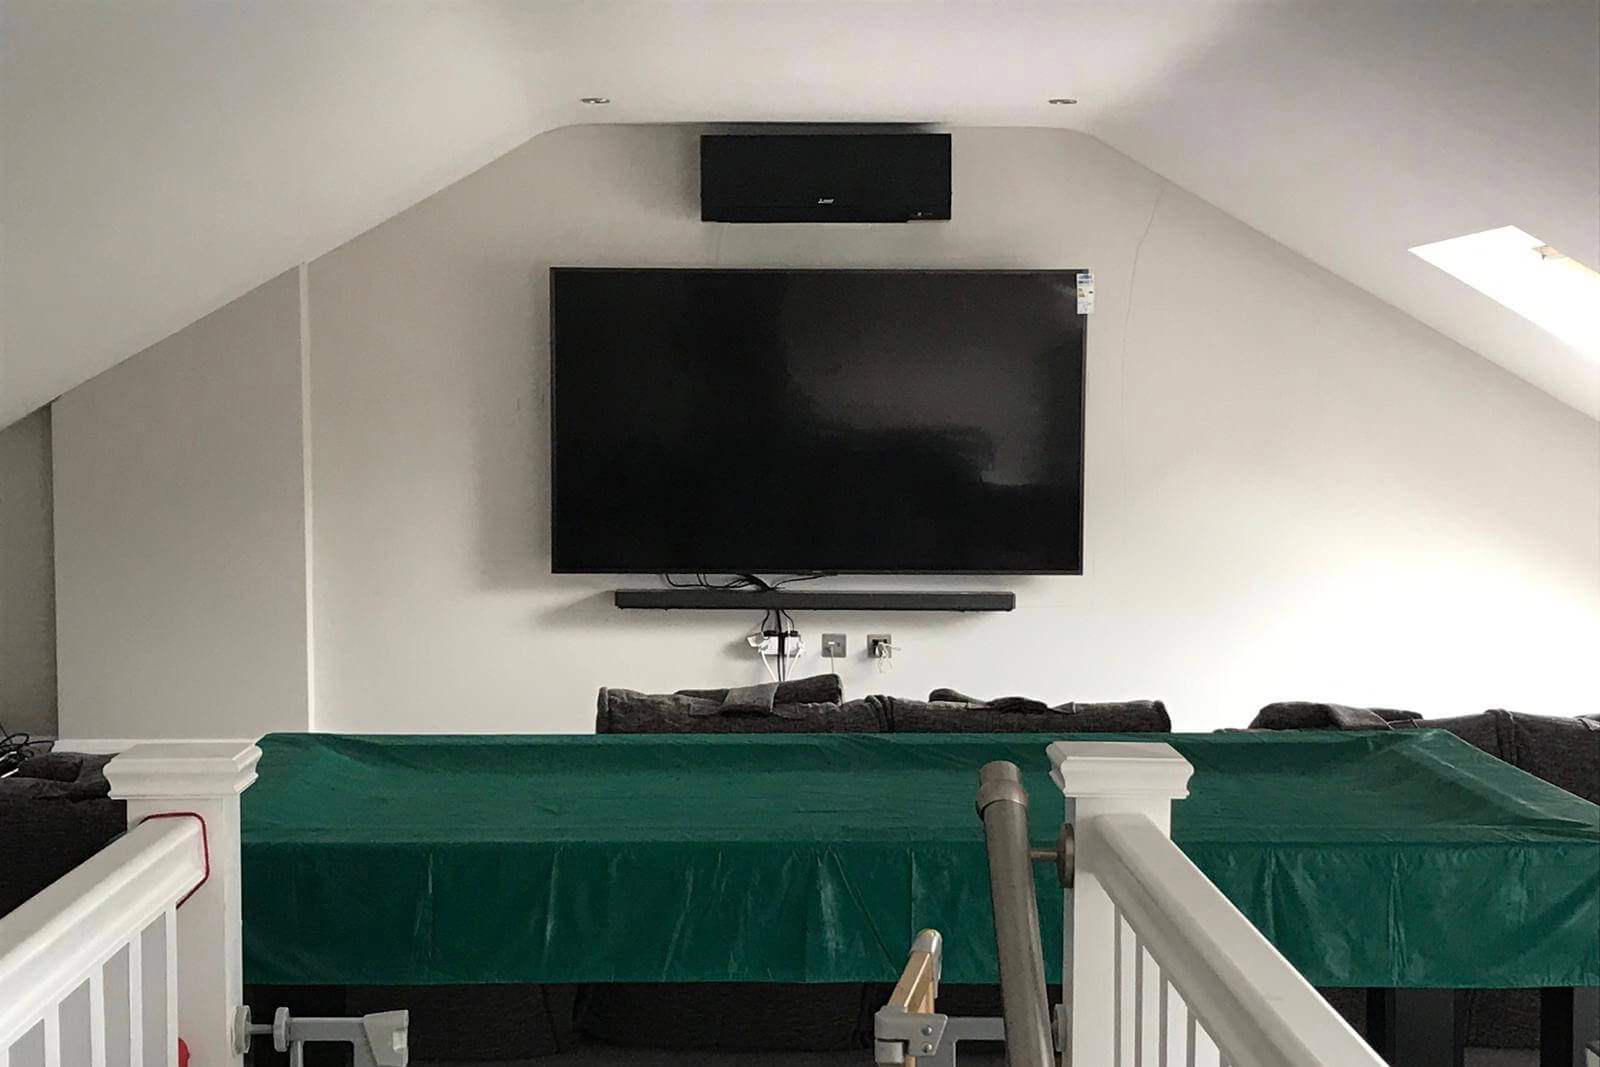 Black mitsubishi electric wall mounted unit above TV in loft conversion